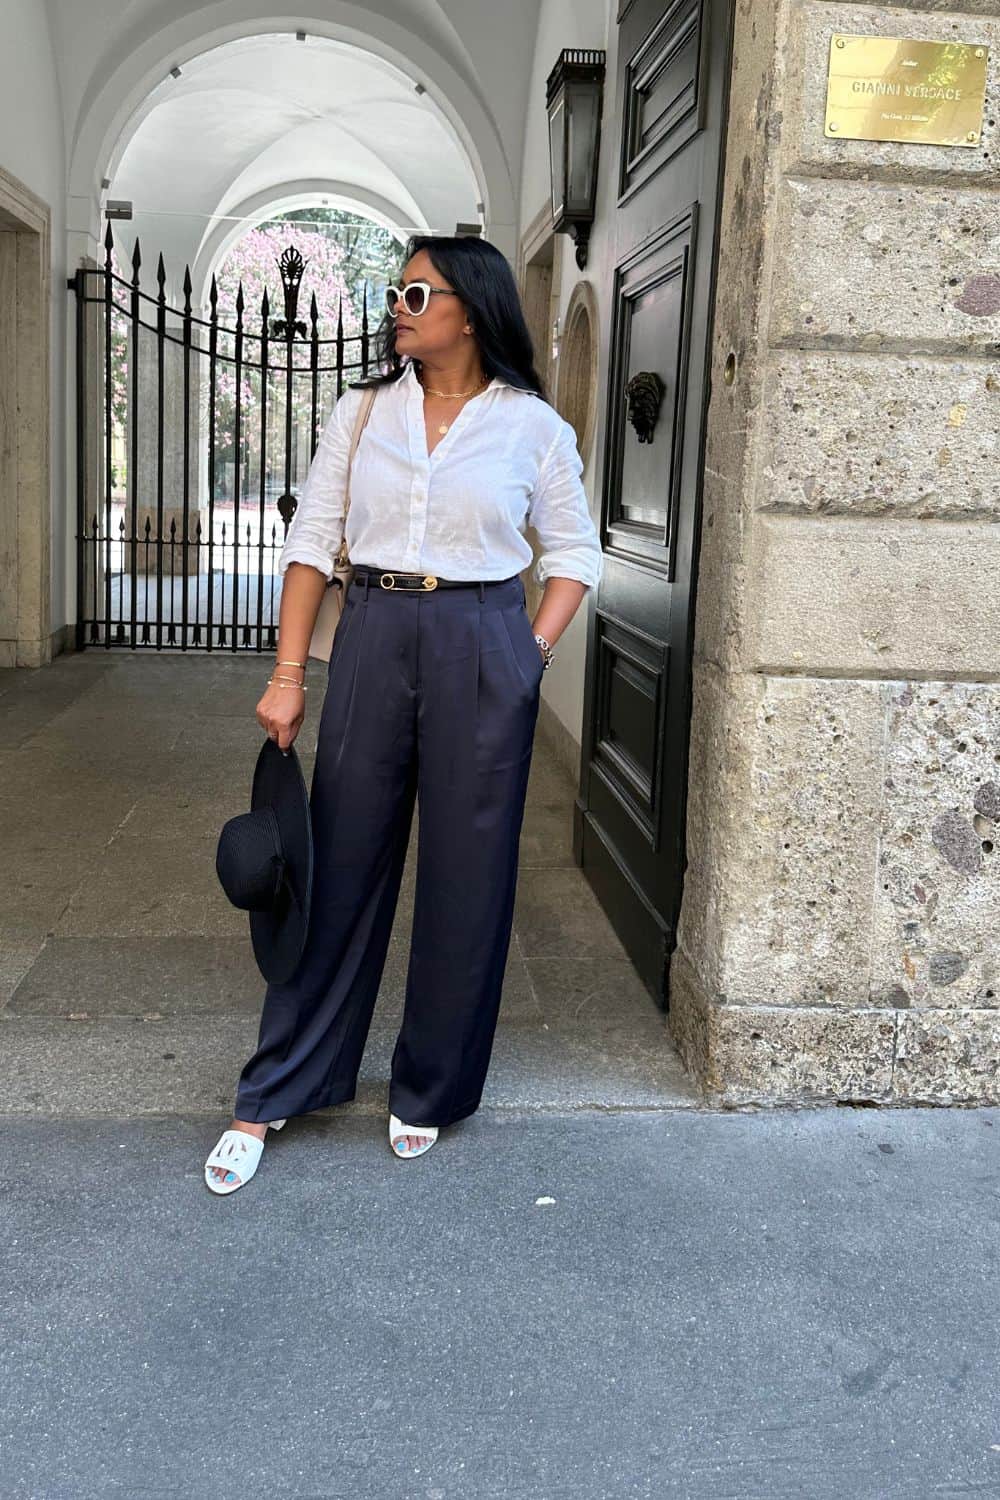 Satin pants and linen shirt outfit for Italy trip